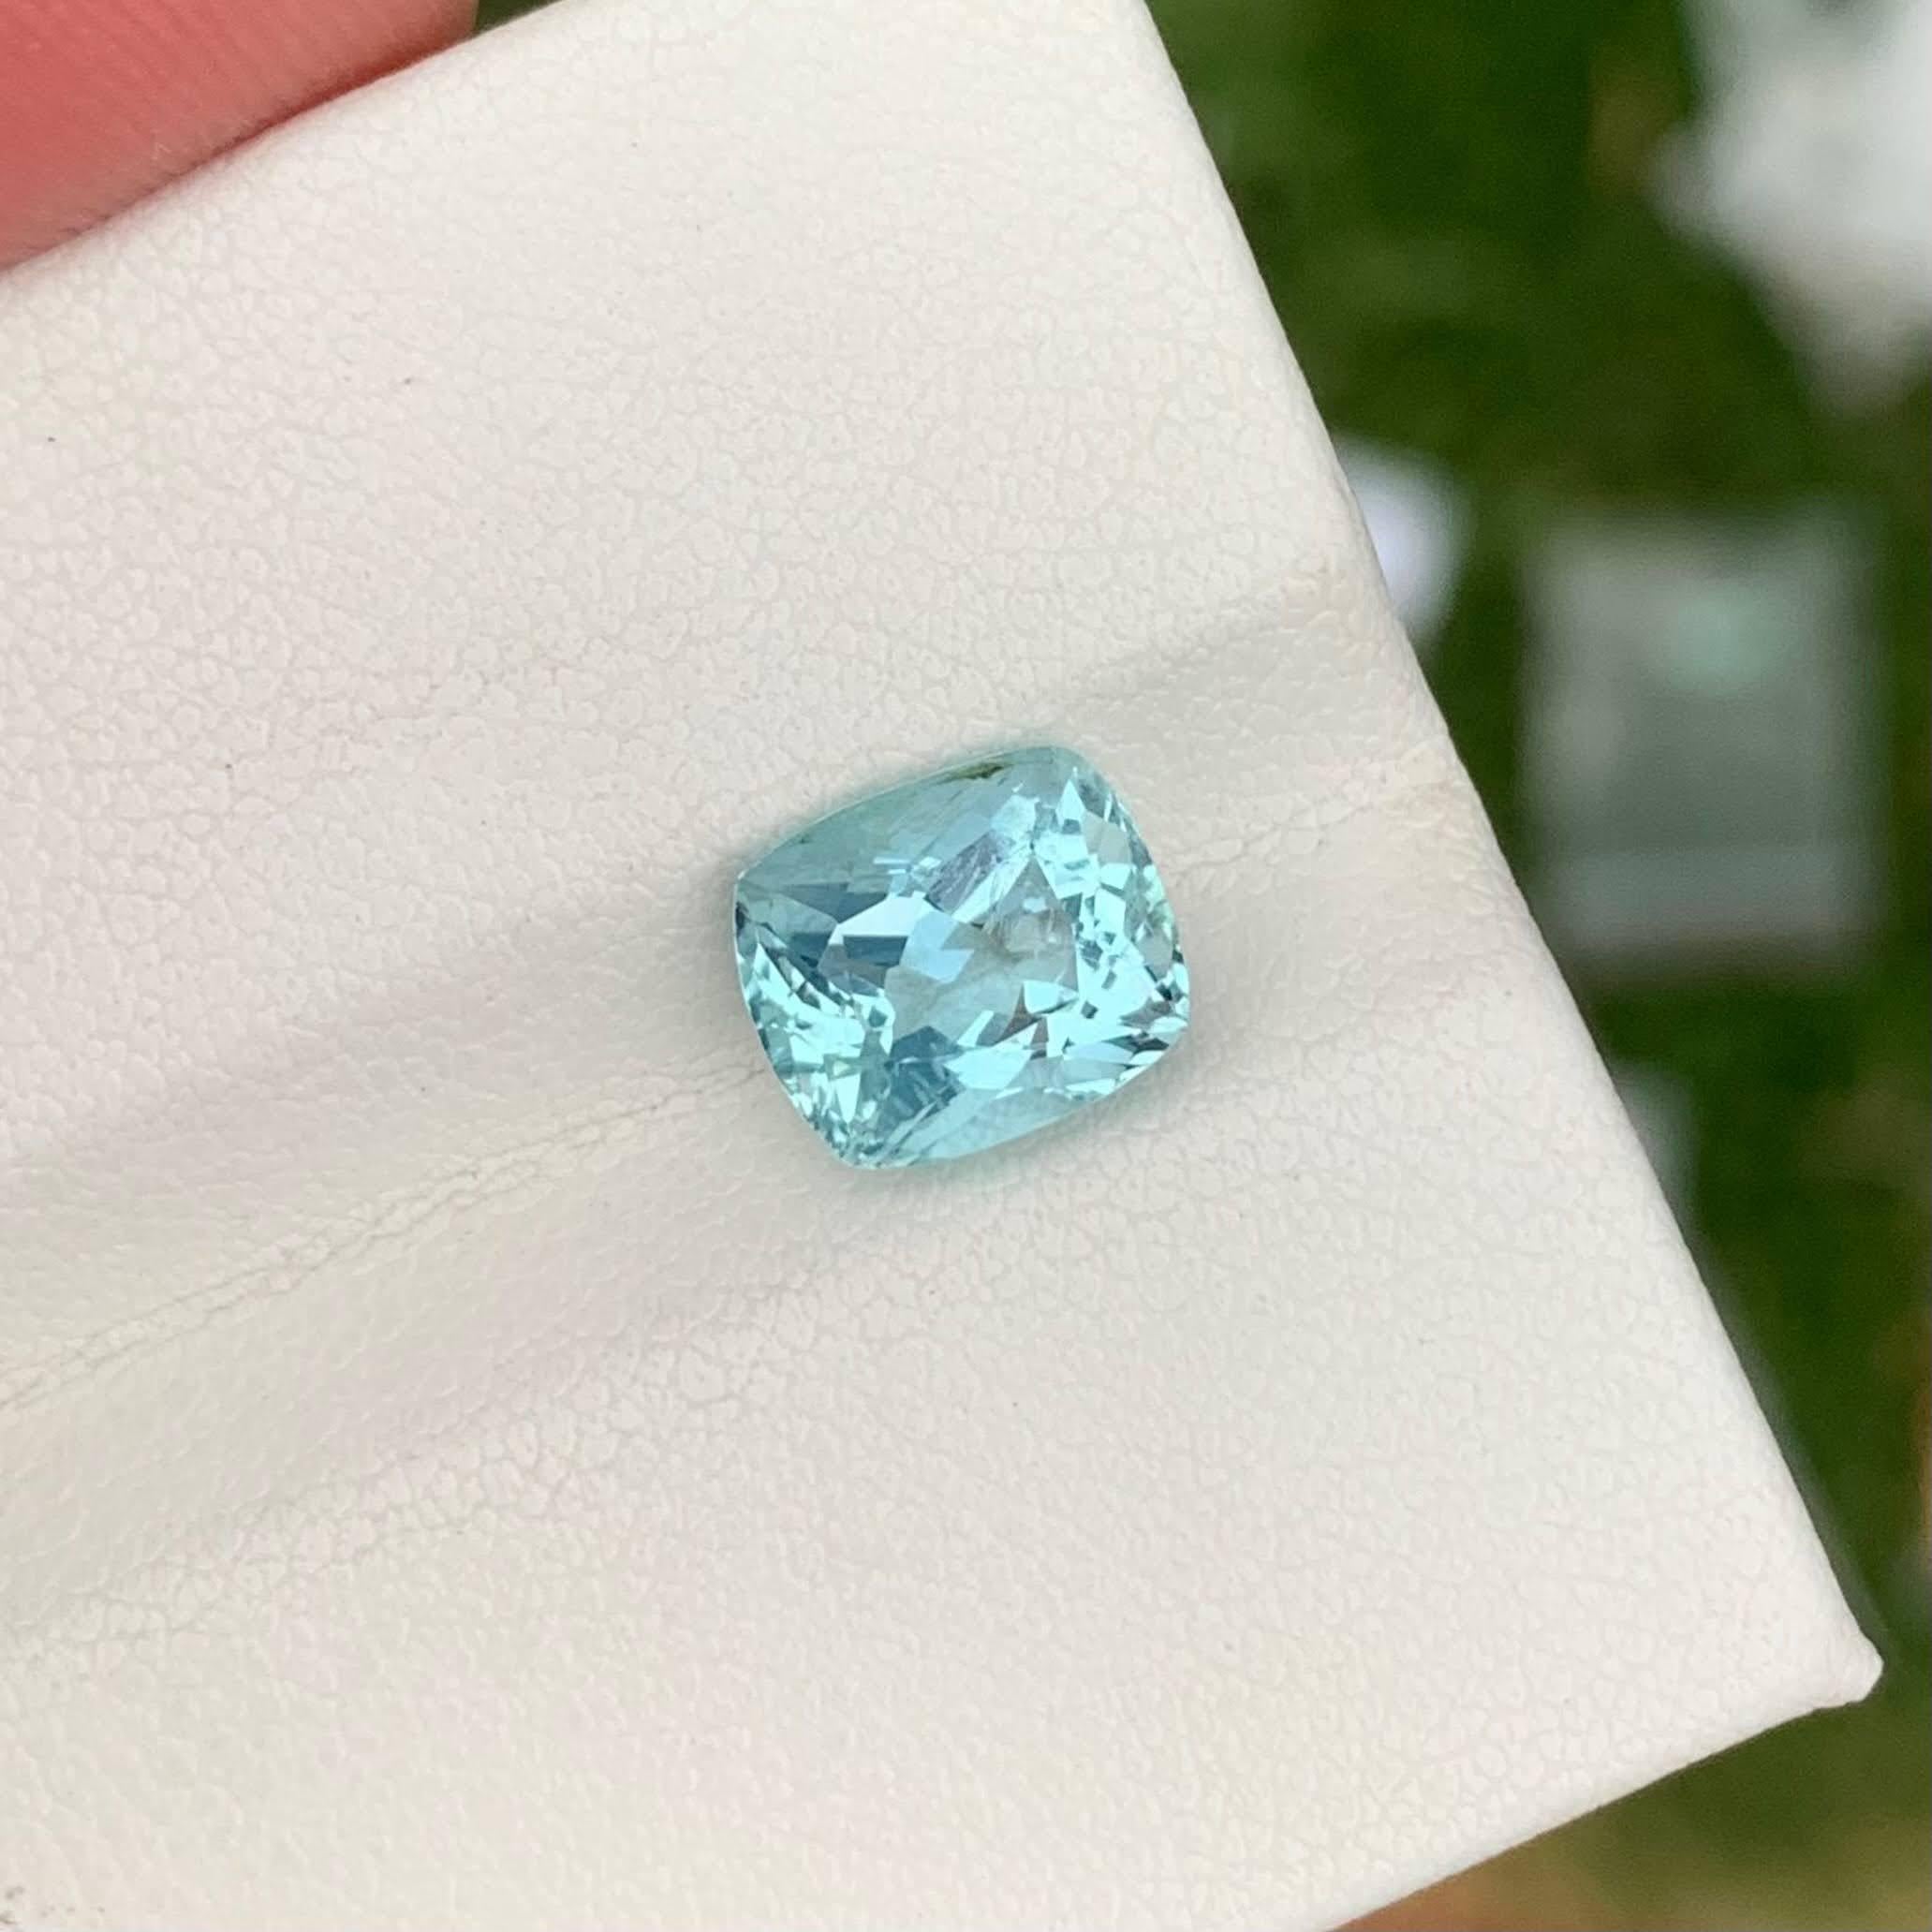 Weight 2.25 carats 
Dimensions 8.6x7.4x5.6 mm
Treatment none 
Origin Nigeria 
Clarity SI 
Shape cushion 
Cut faceted 




This exquisite 2.25 carats Light Blue Aquamarine, cut into a refined Cushion shape, showcases the natural beauty of Nigerian